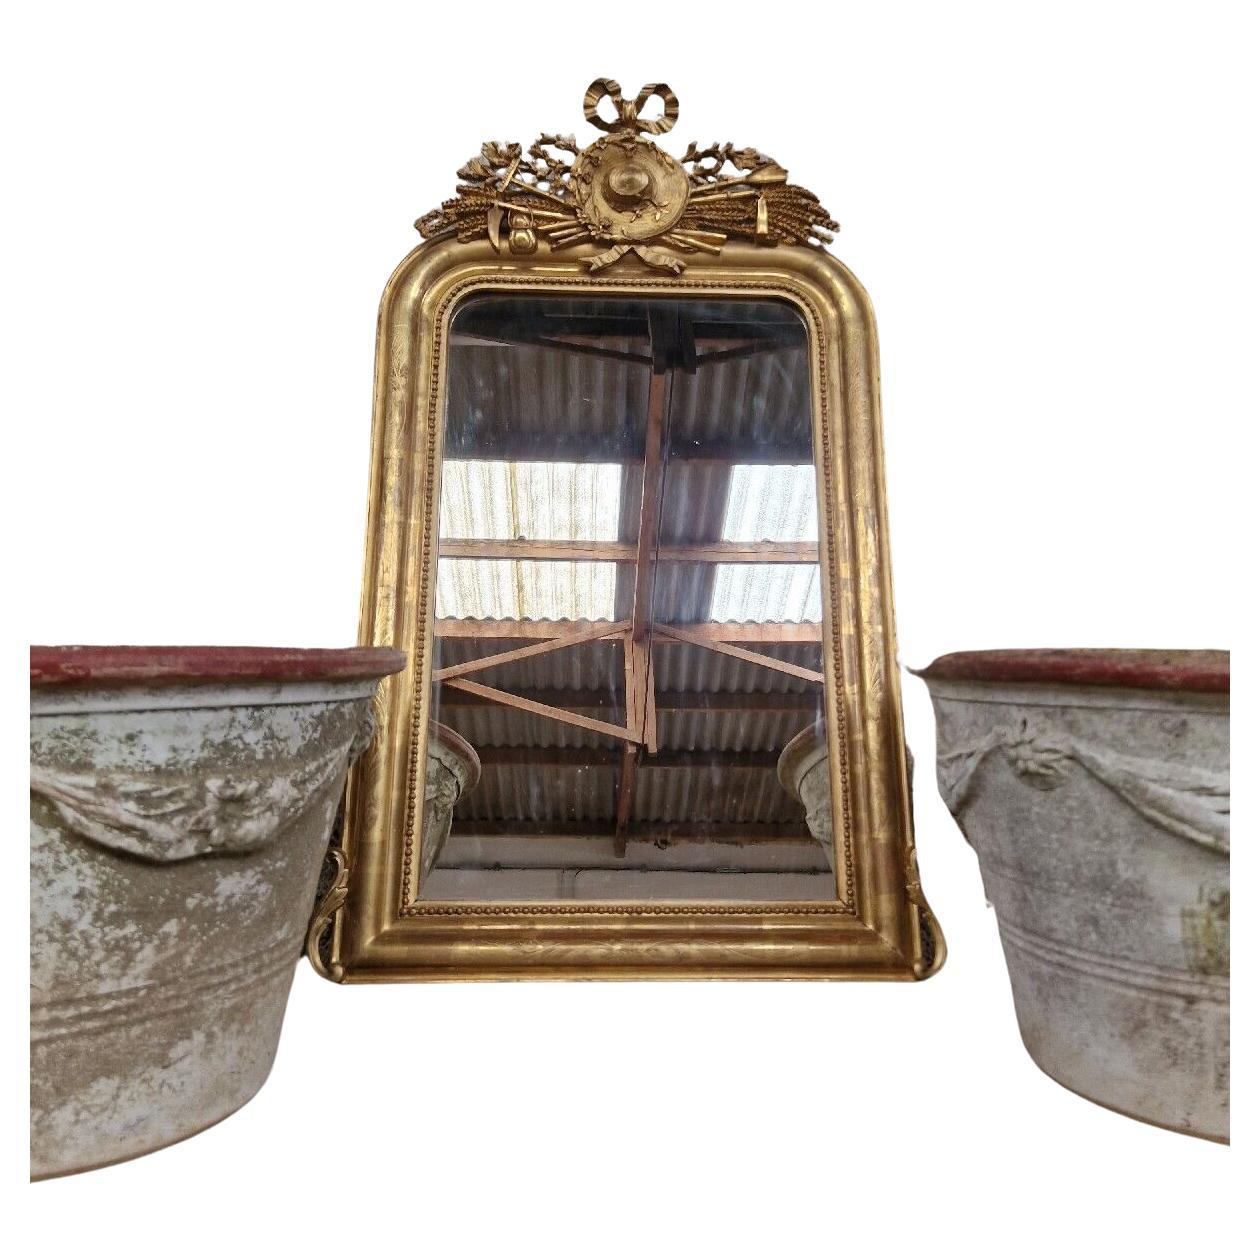 Antique Mirror with Carved Harvest Theme Crest


Fabulous Louis XVI Style

Good Condition

Straw Hat with Barley & Ribbons

Giltwood Frame

Decoration to Surround in Stucco

19th Century

Beautiful Patina


Measurements

140 x 60cm

Listing